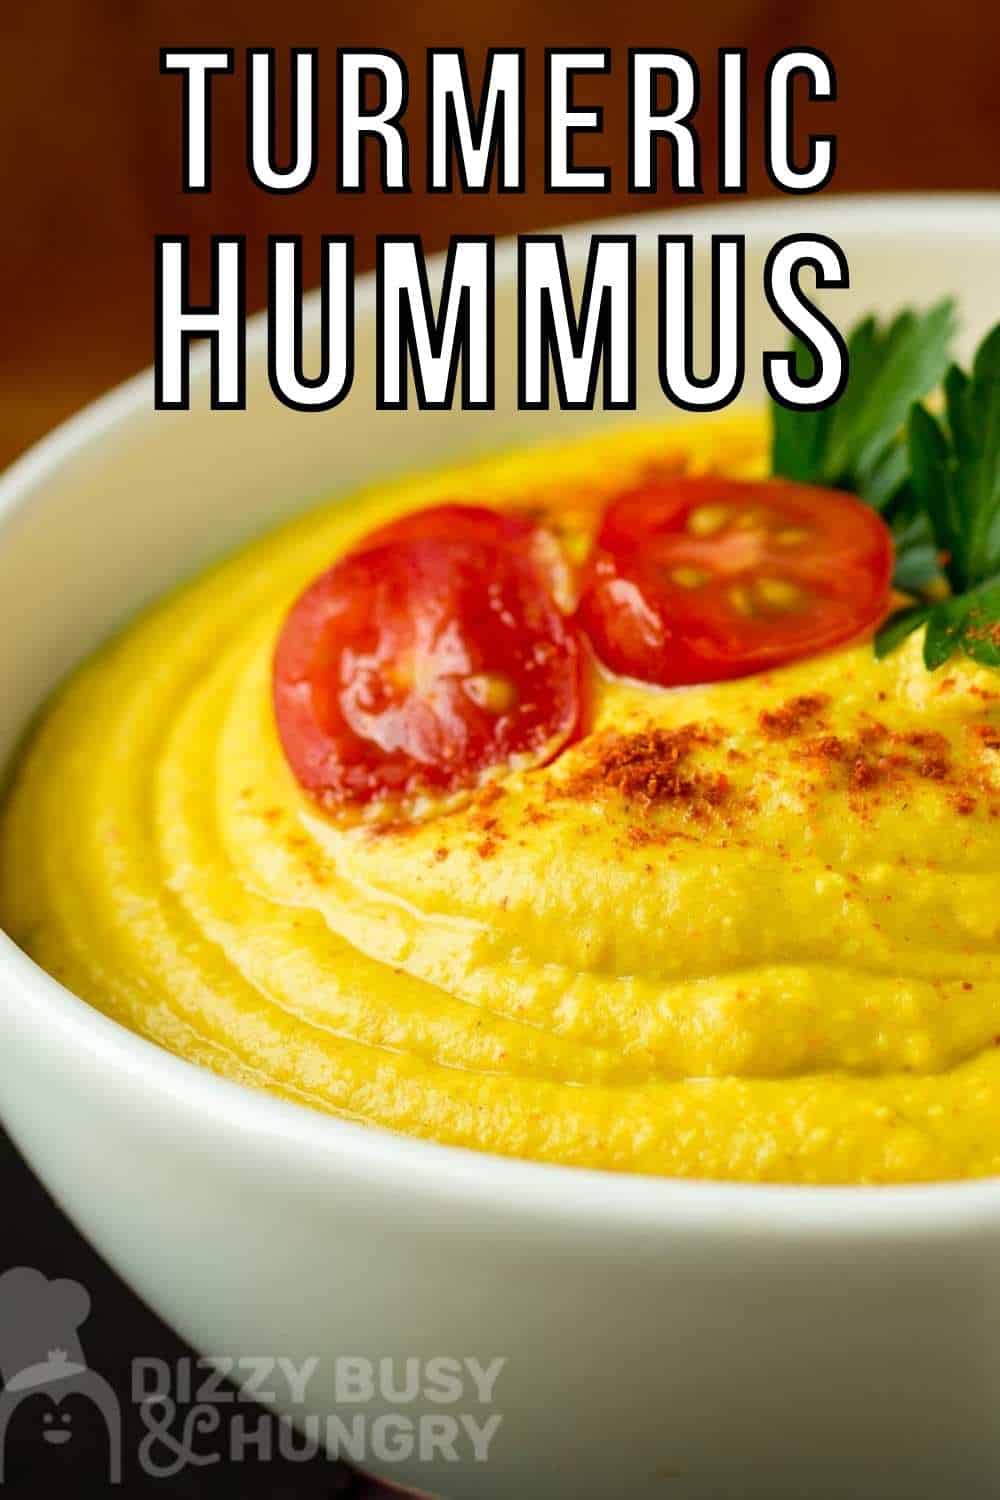 Close up side shot of hummus garnished with halved cherry tomatoes, herbs, and paprika in a white bowl on a wooden surface.